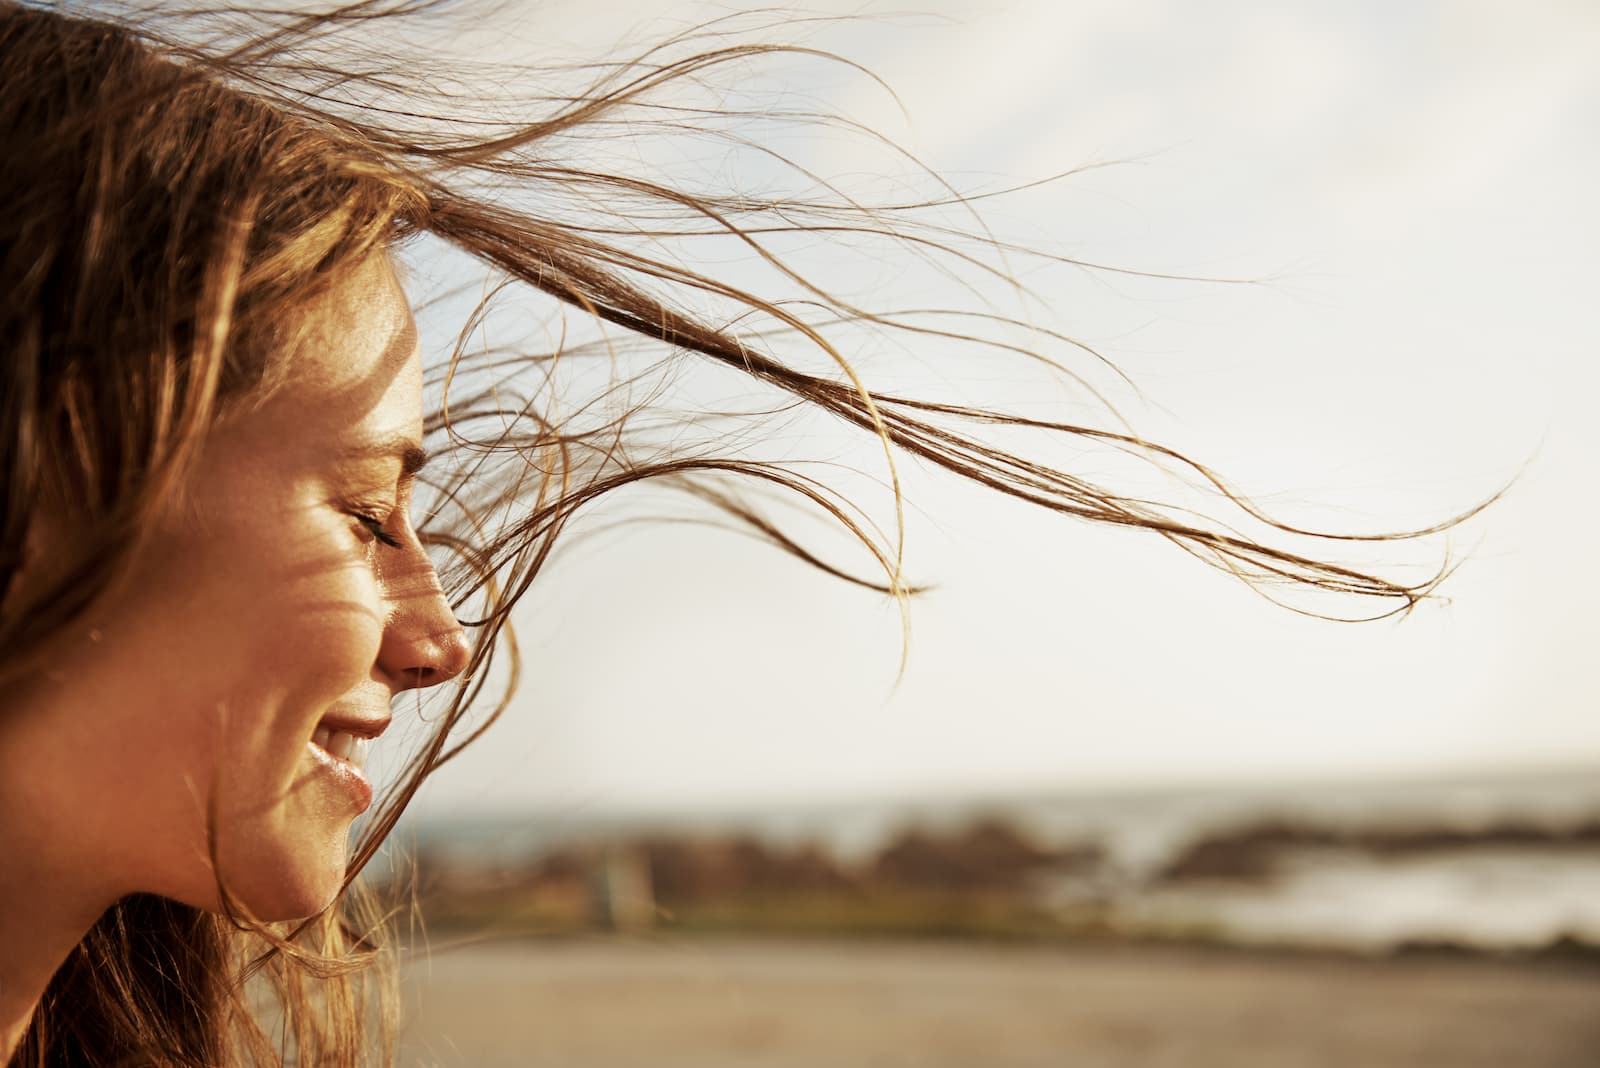 A women smiling while wind blows through her hair